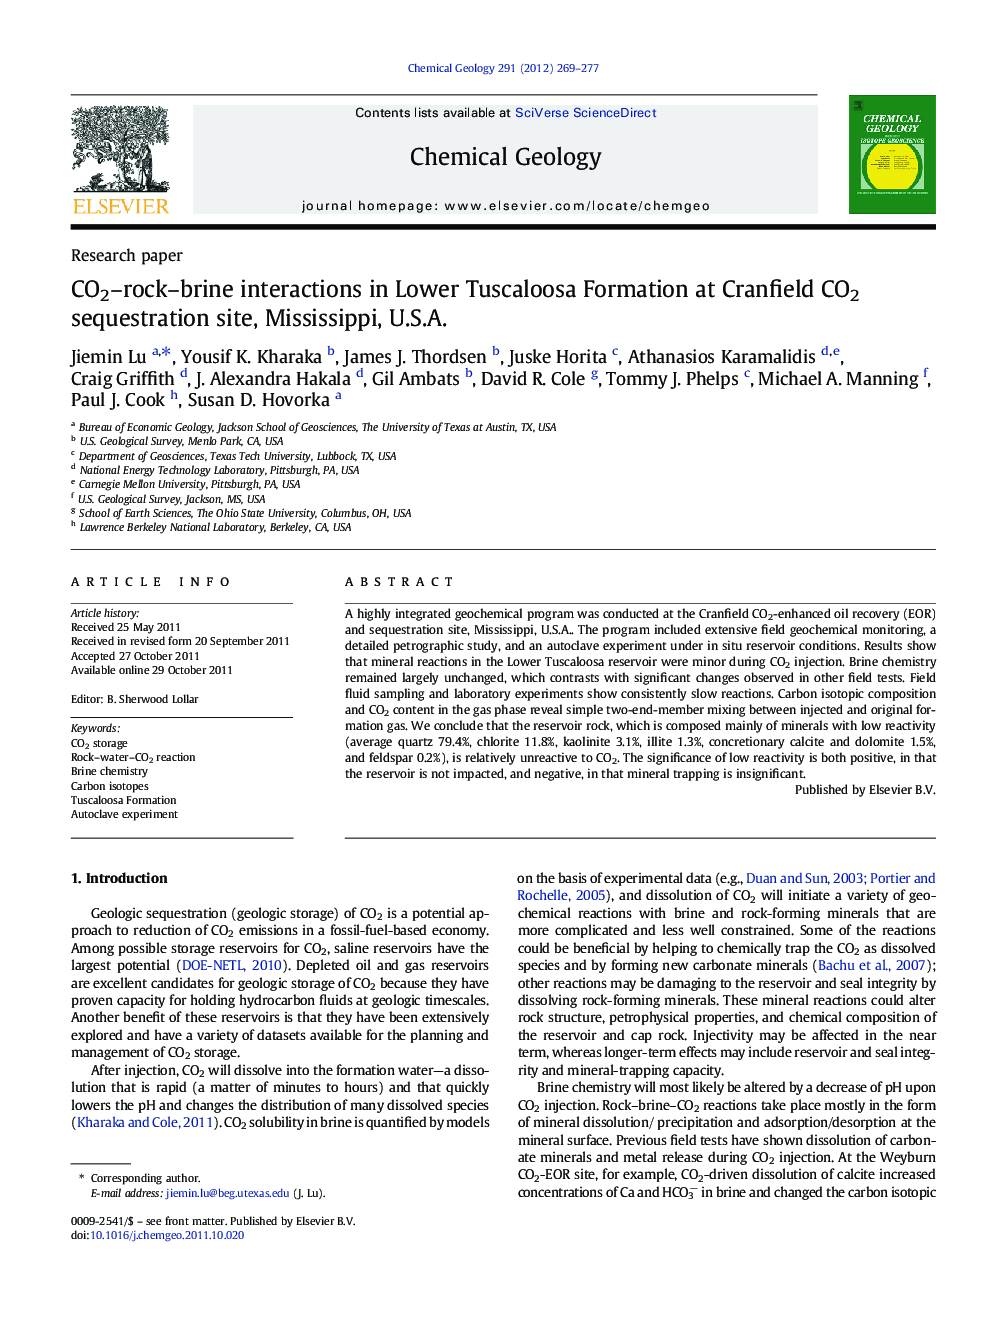 CO2–rock–brine interactions in Lower Tuscaloosa Formation at Cranfield CO2 sequestration site, Mississippi, U.S.A.